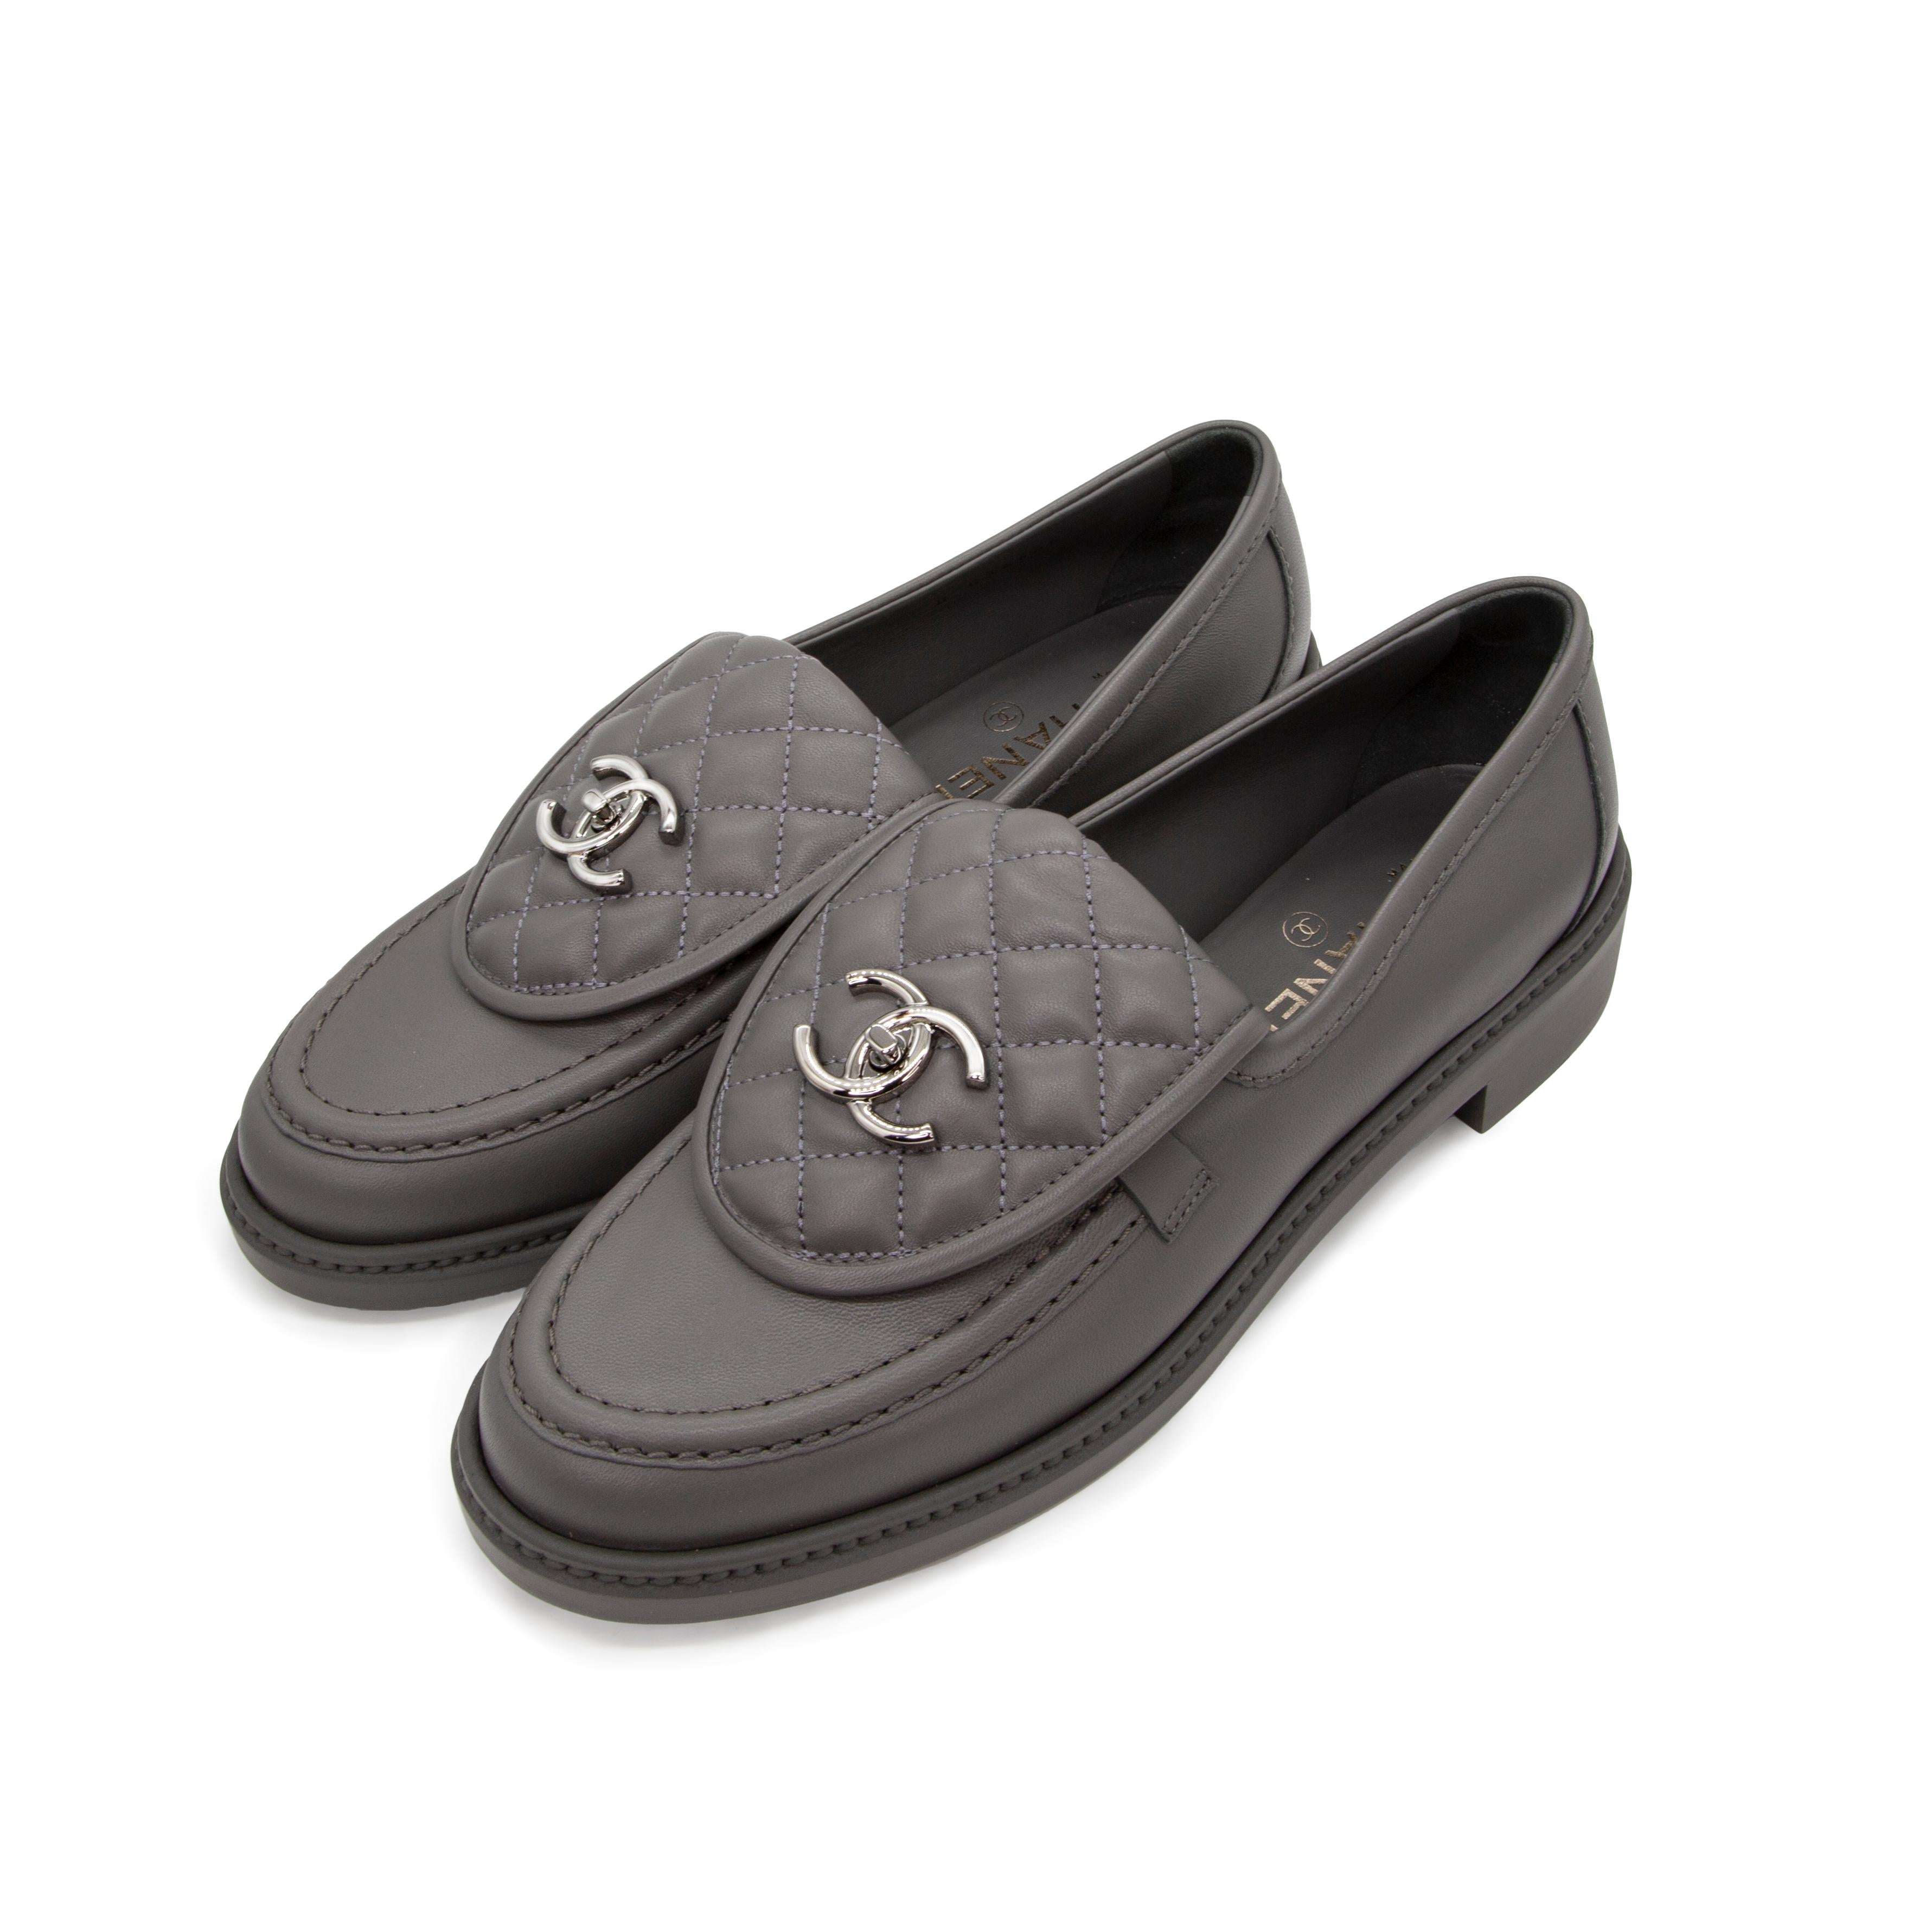 These Quilted Chanel Leather Loafers are the perfect piece of luxury for every day. Crafted from soft leather in grey featuring the iconic interlocking CC logo and diamond shape quilted detail. Size EU 40.5

Colour: Grey

Size: 40.5

Condition: